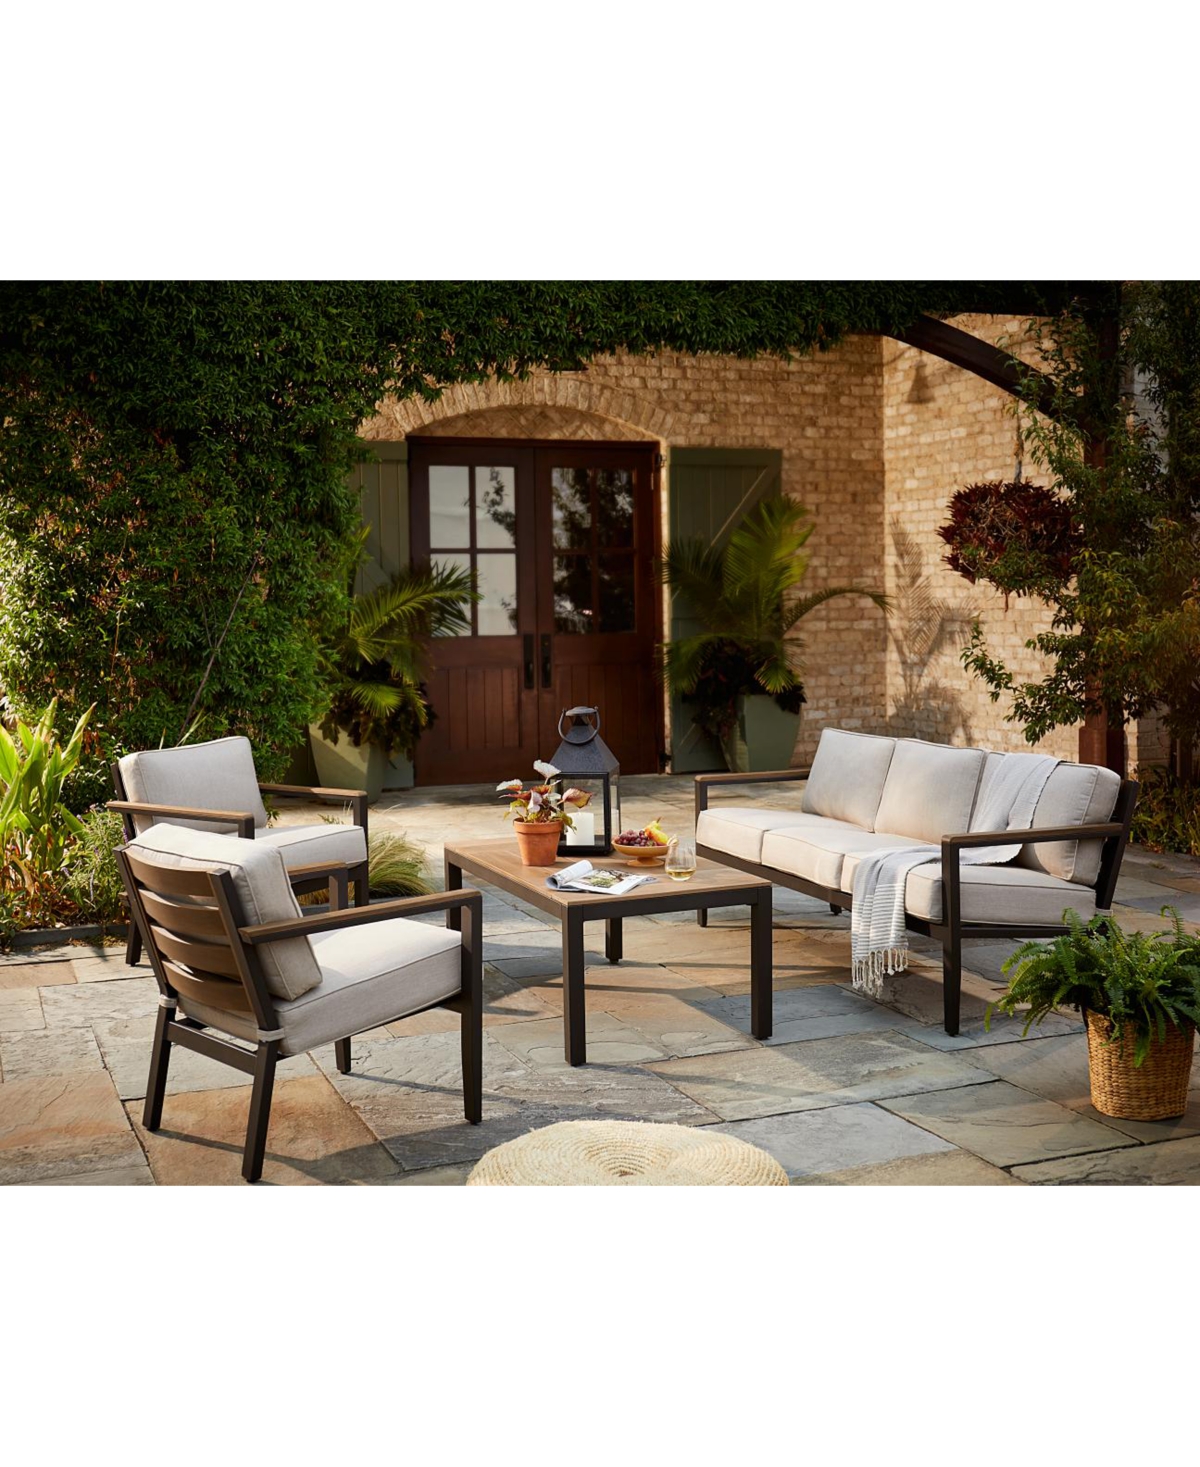 Stockholm Outdoor 4-Pc. Seating Set (Sofa, 2 Club Chairs & Coffee Table) with Outdoor Cushions, Created for Macys